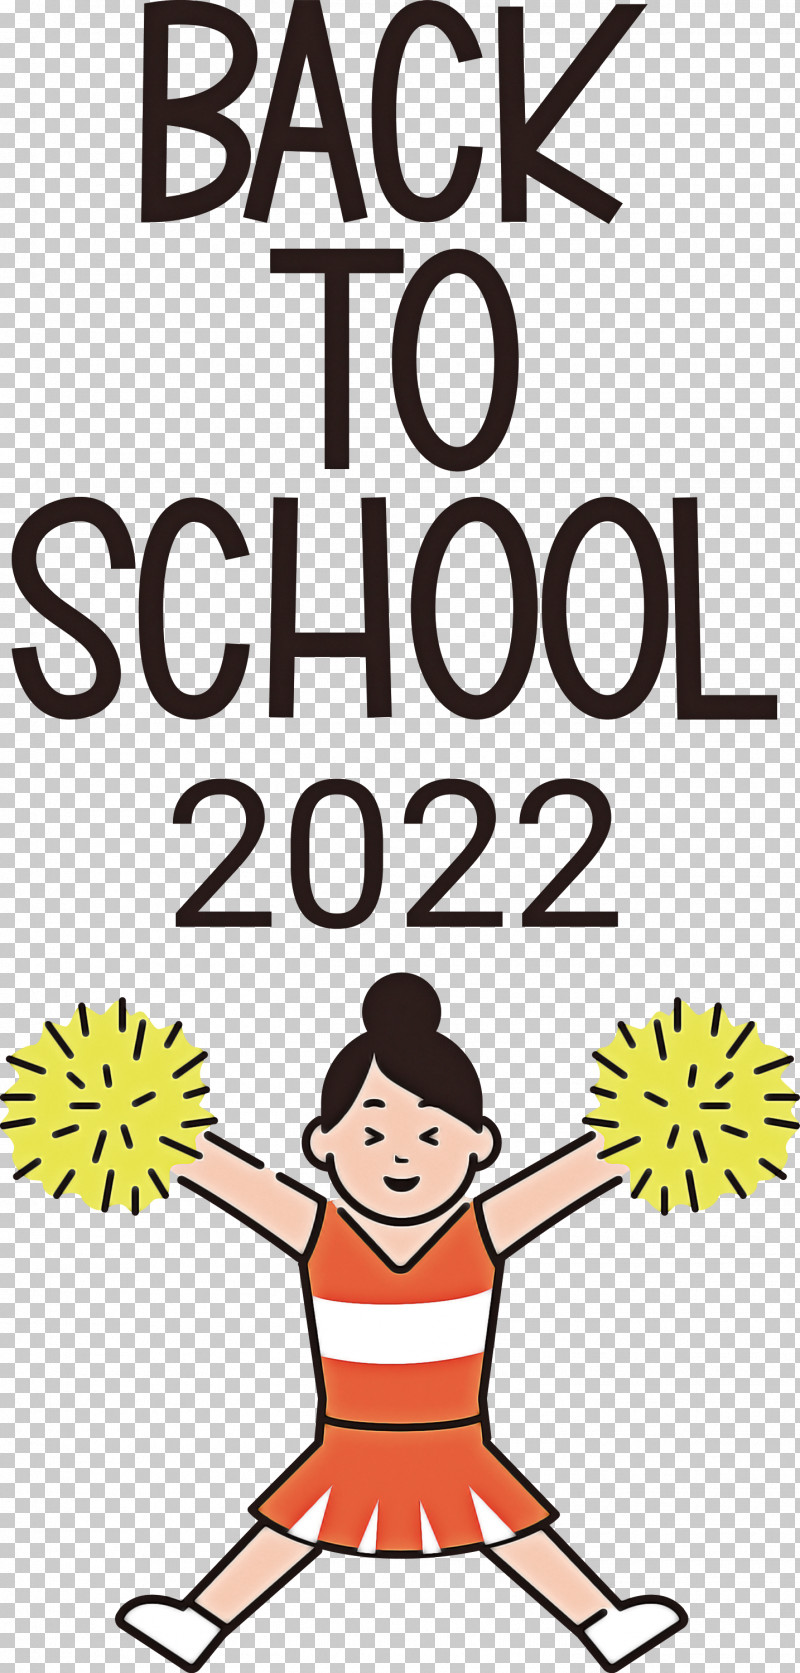 Back To School 2022 PNG, Clipart, Behavior, Cartoon, Geometry, Happiness, Human Free PNG Download